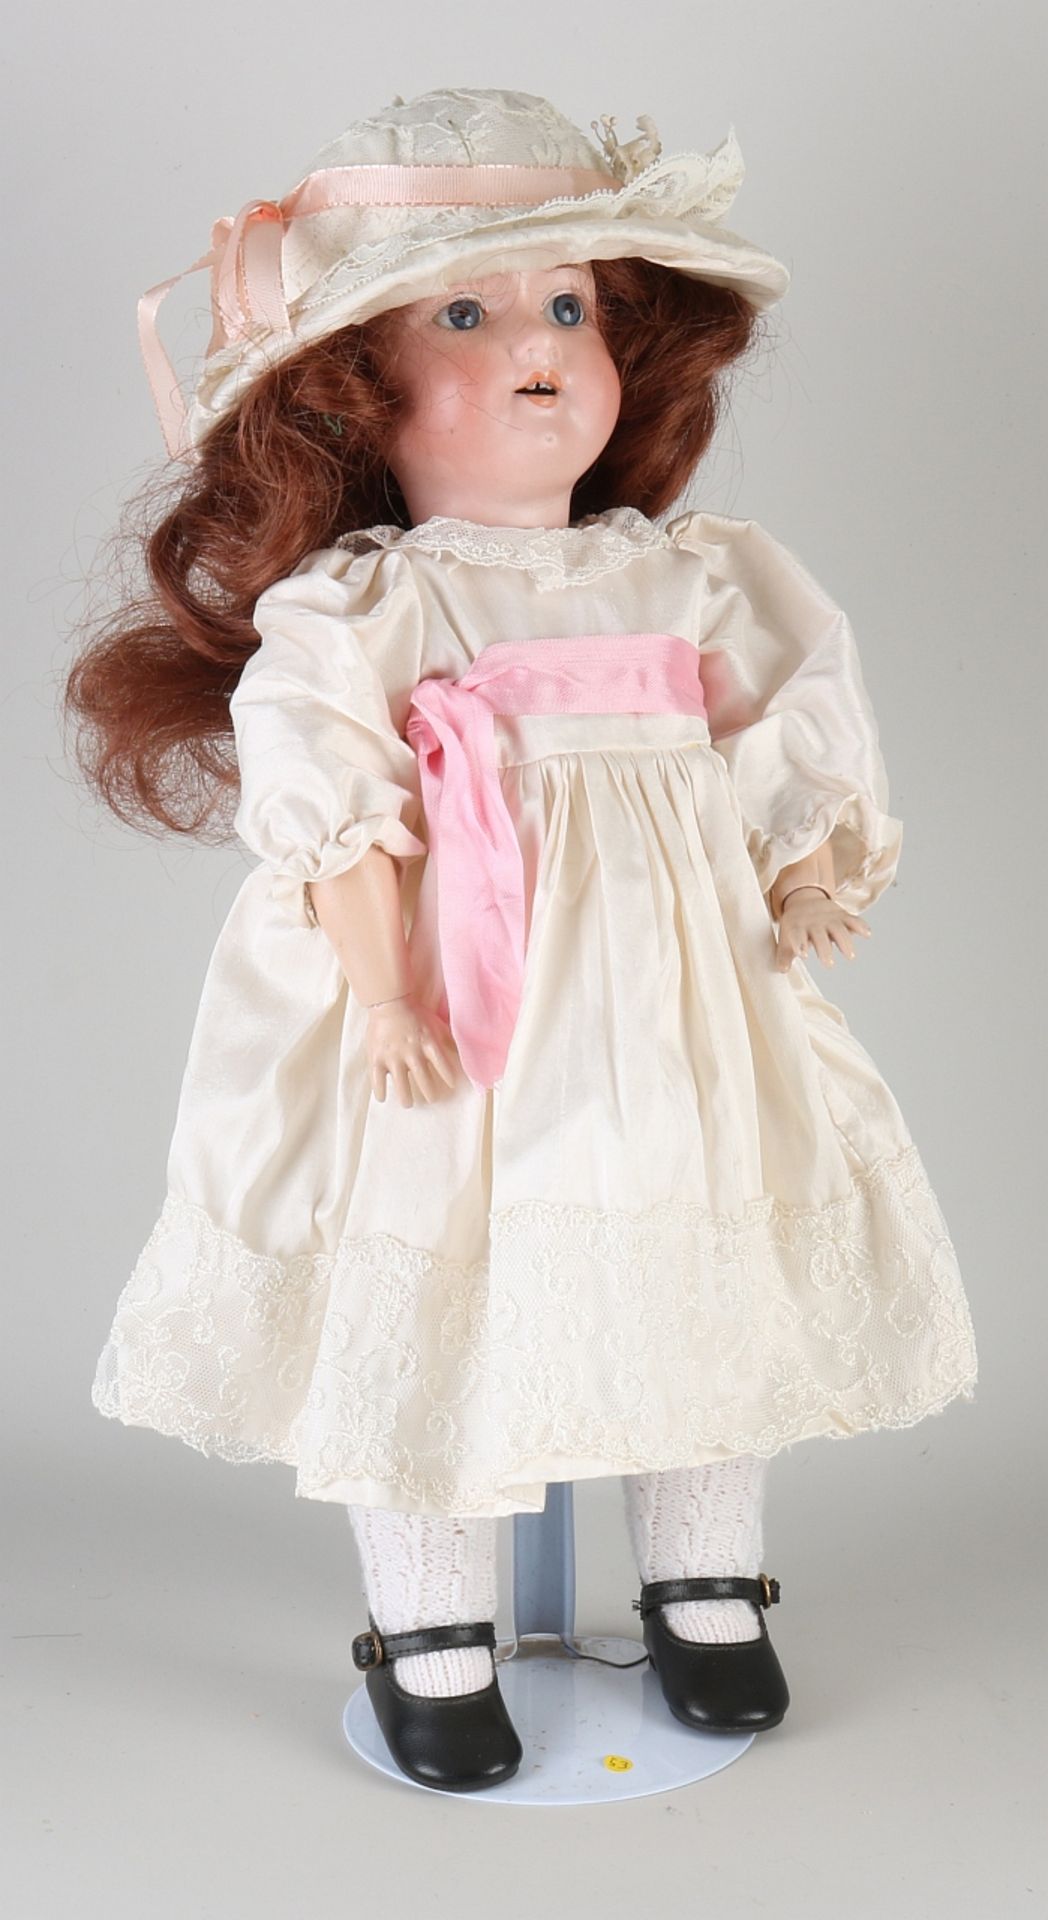 Old/antique doll